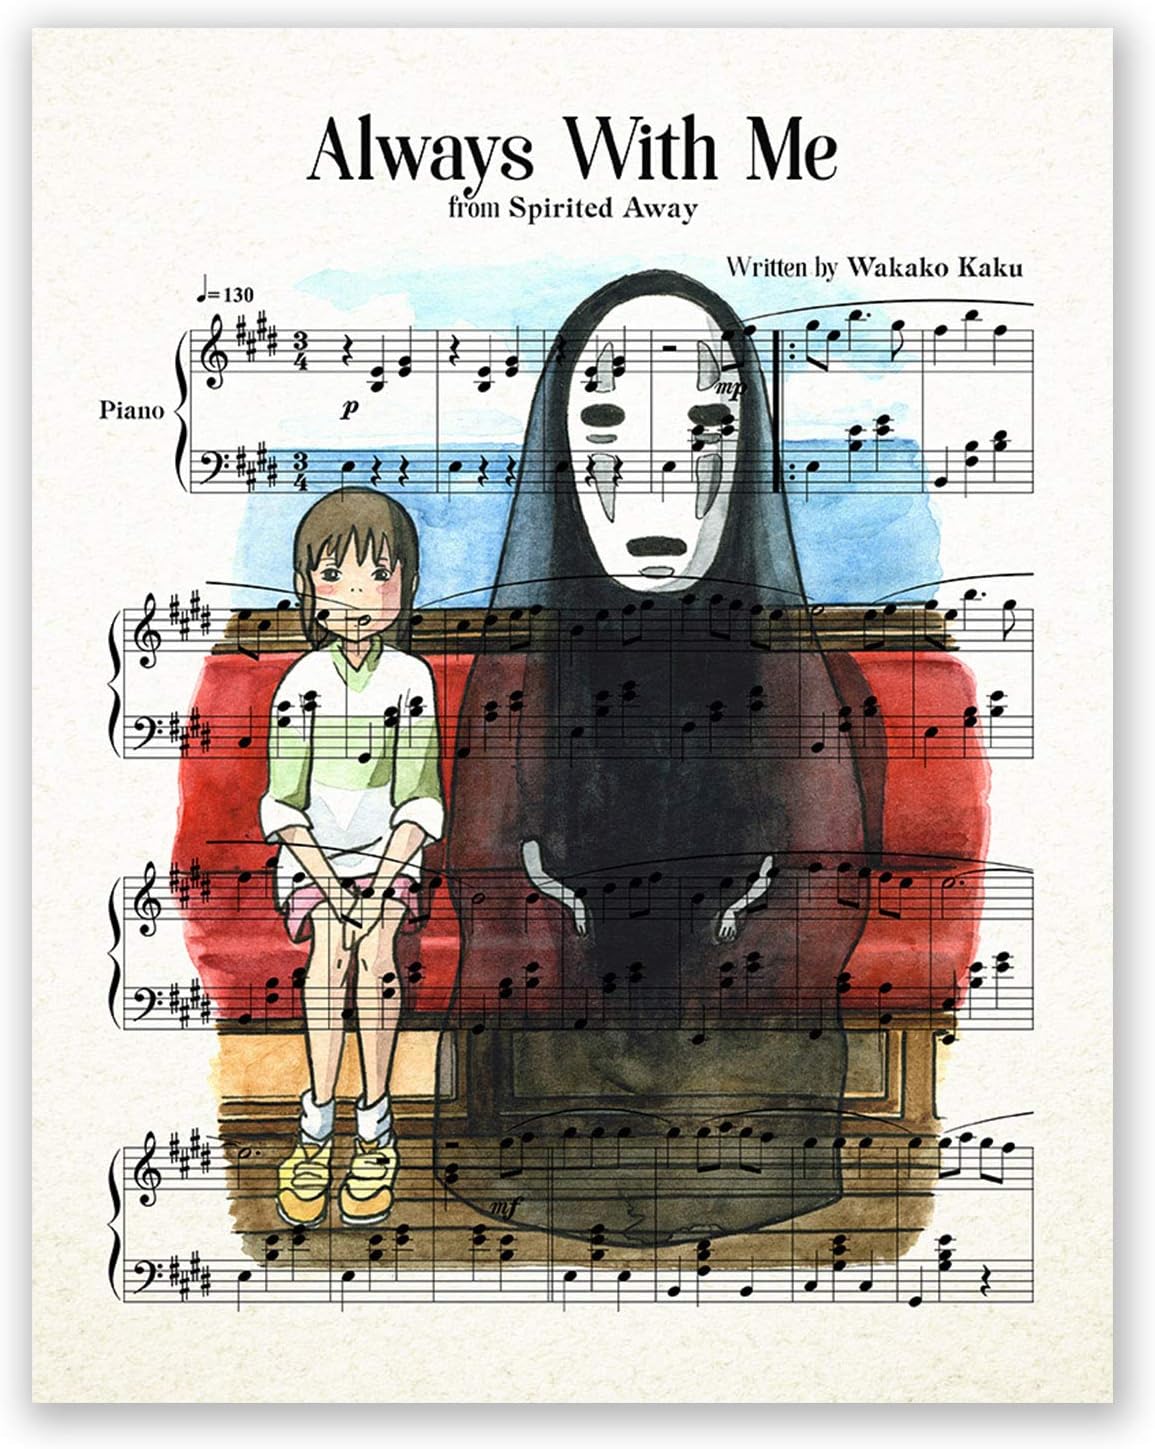 brian rama recommends always with me movie pic